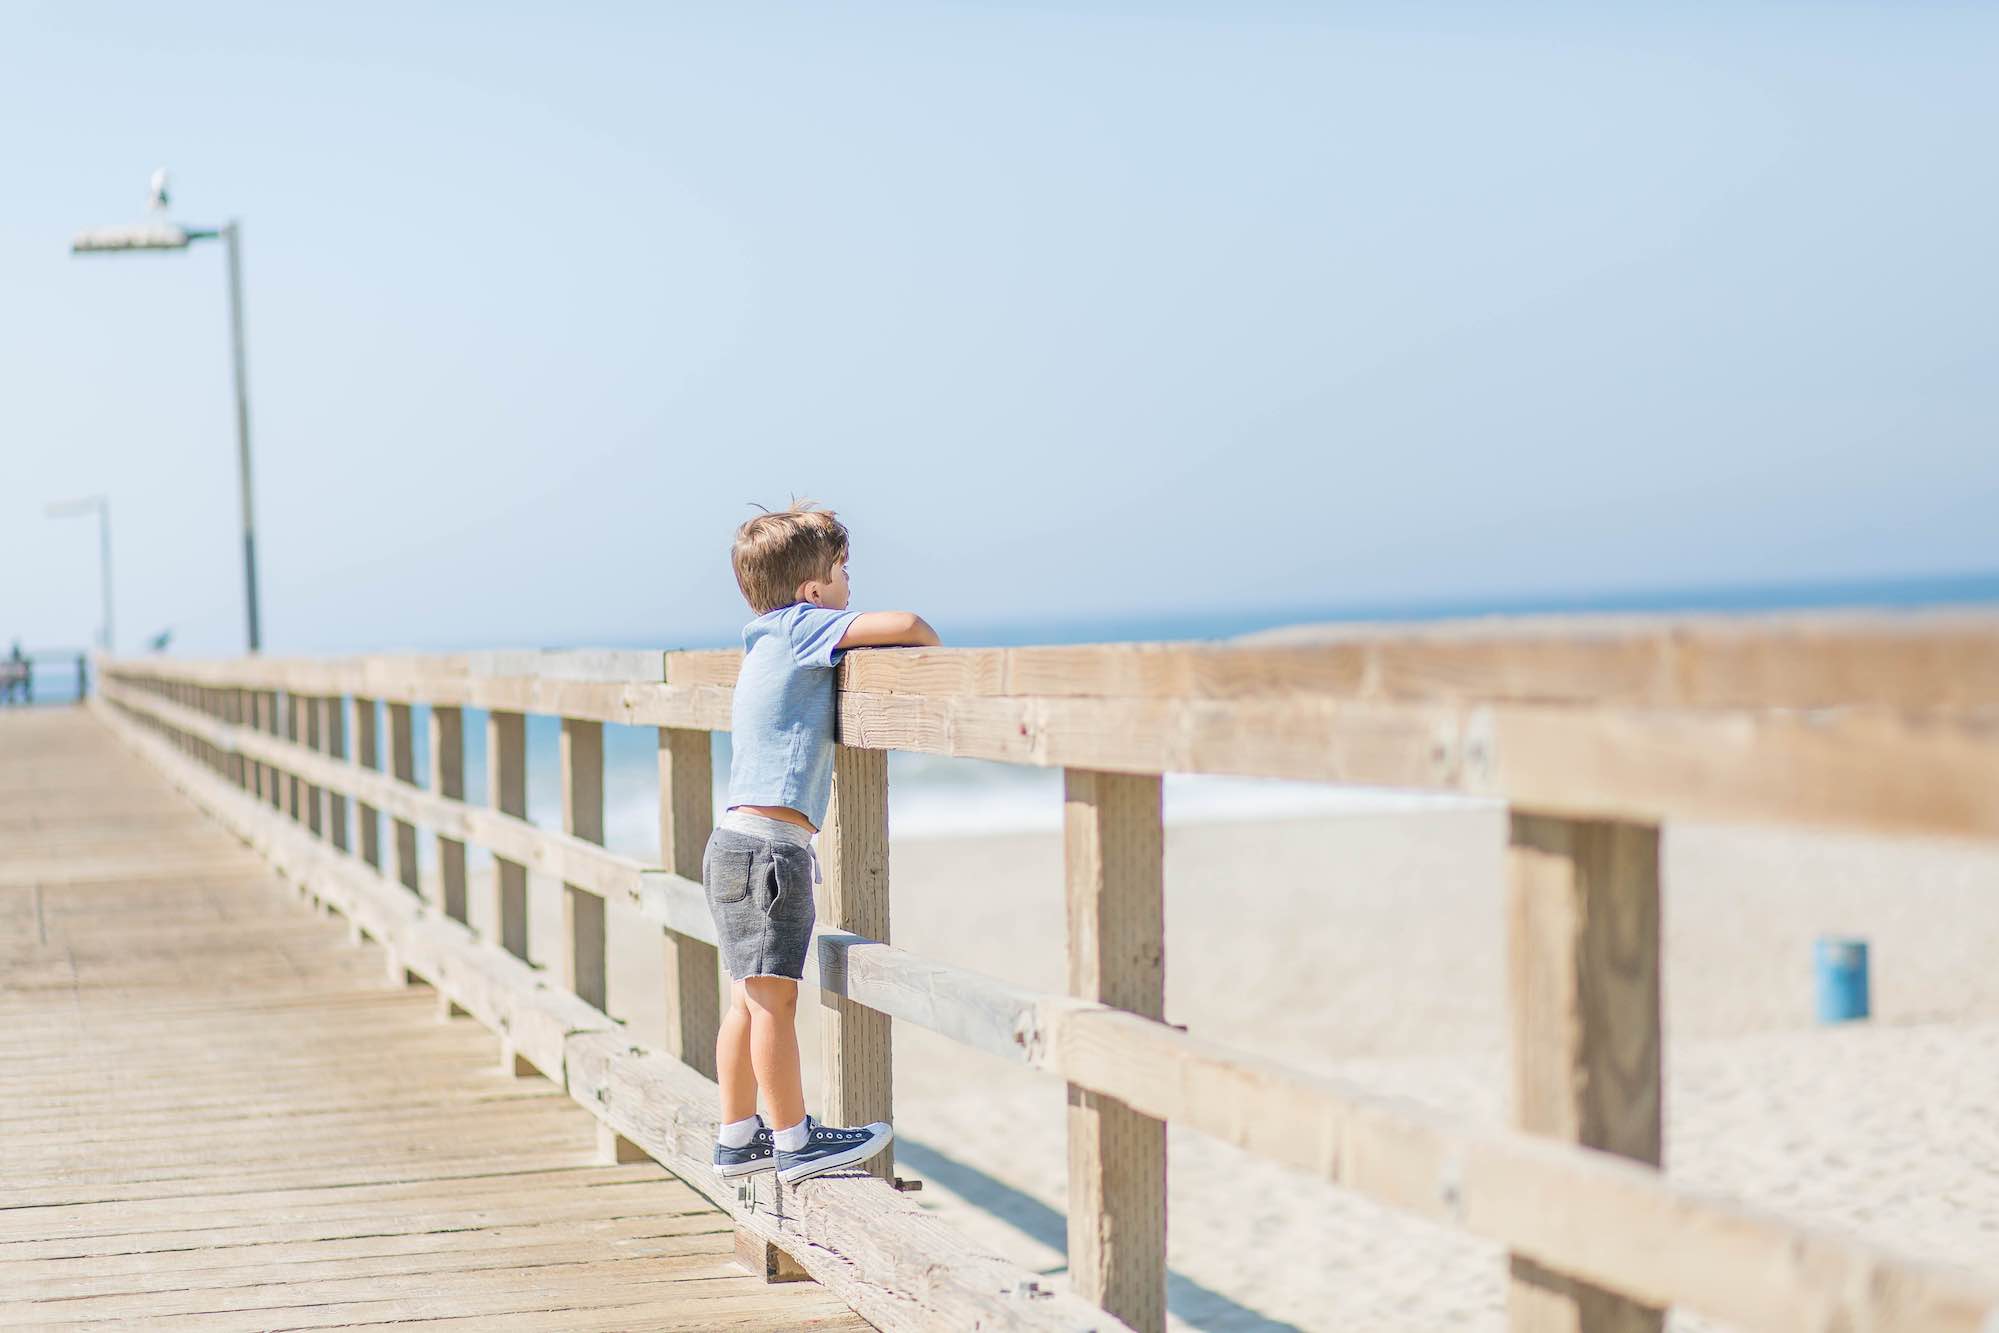 Young boy looking over the rail at Port Hueneme Pier.